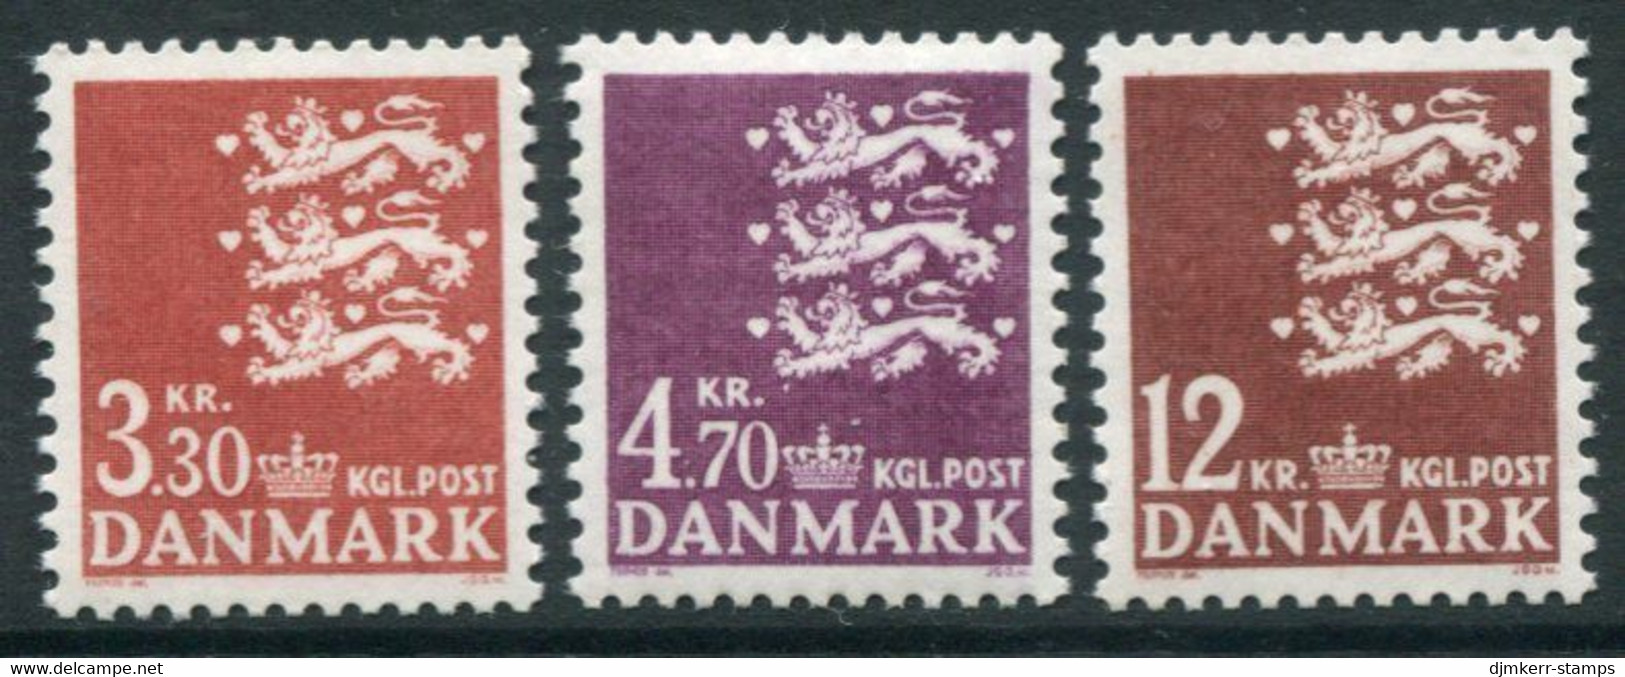 DENMARK 1981 Small Arms Definitive 3.30, 4.70, 12 Kr. MNH / ** Michel 725-27 - Unused Stamps